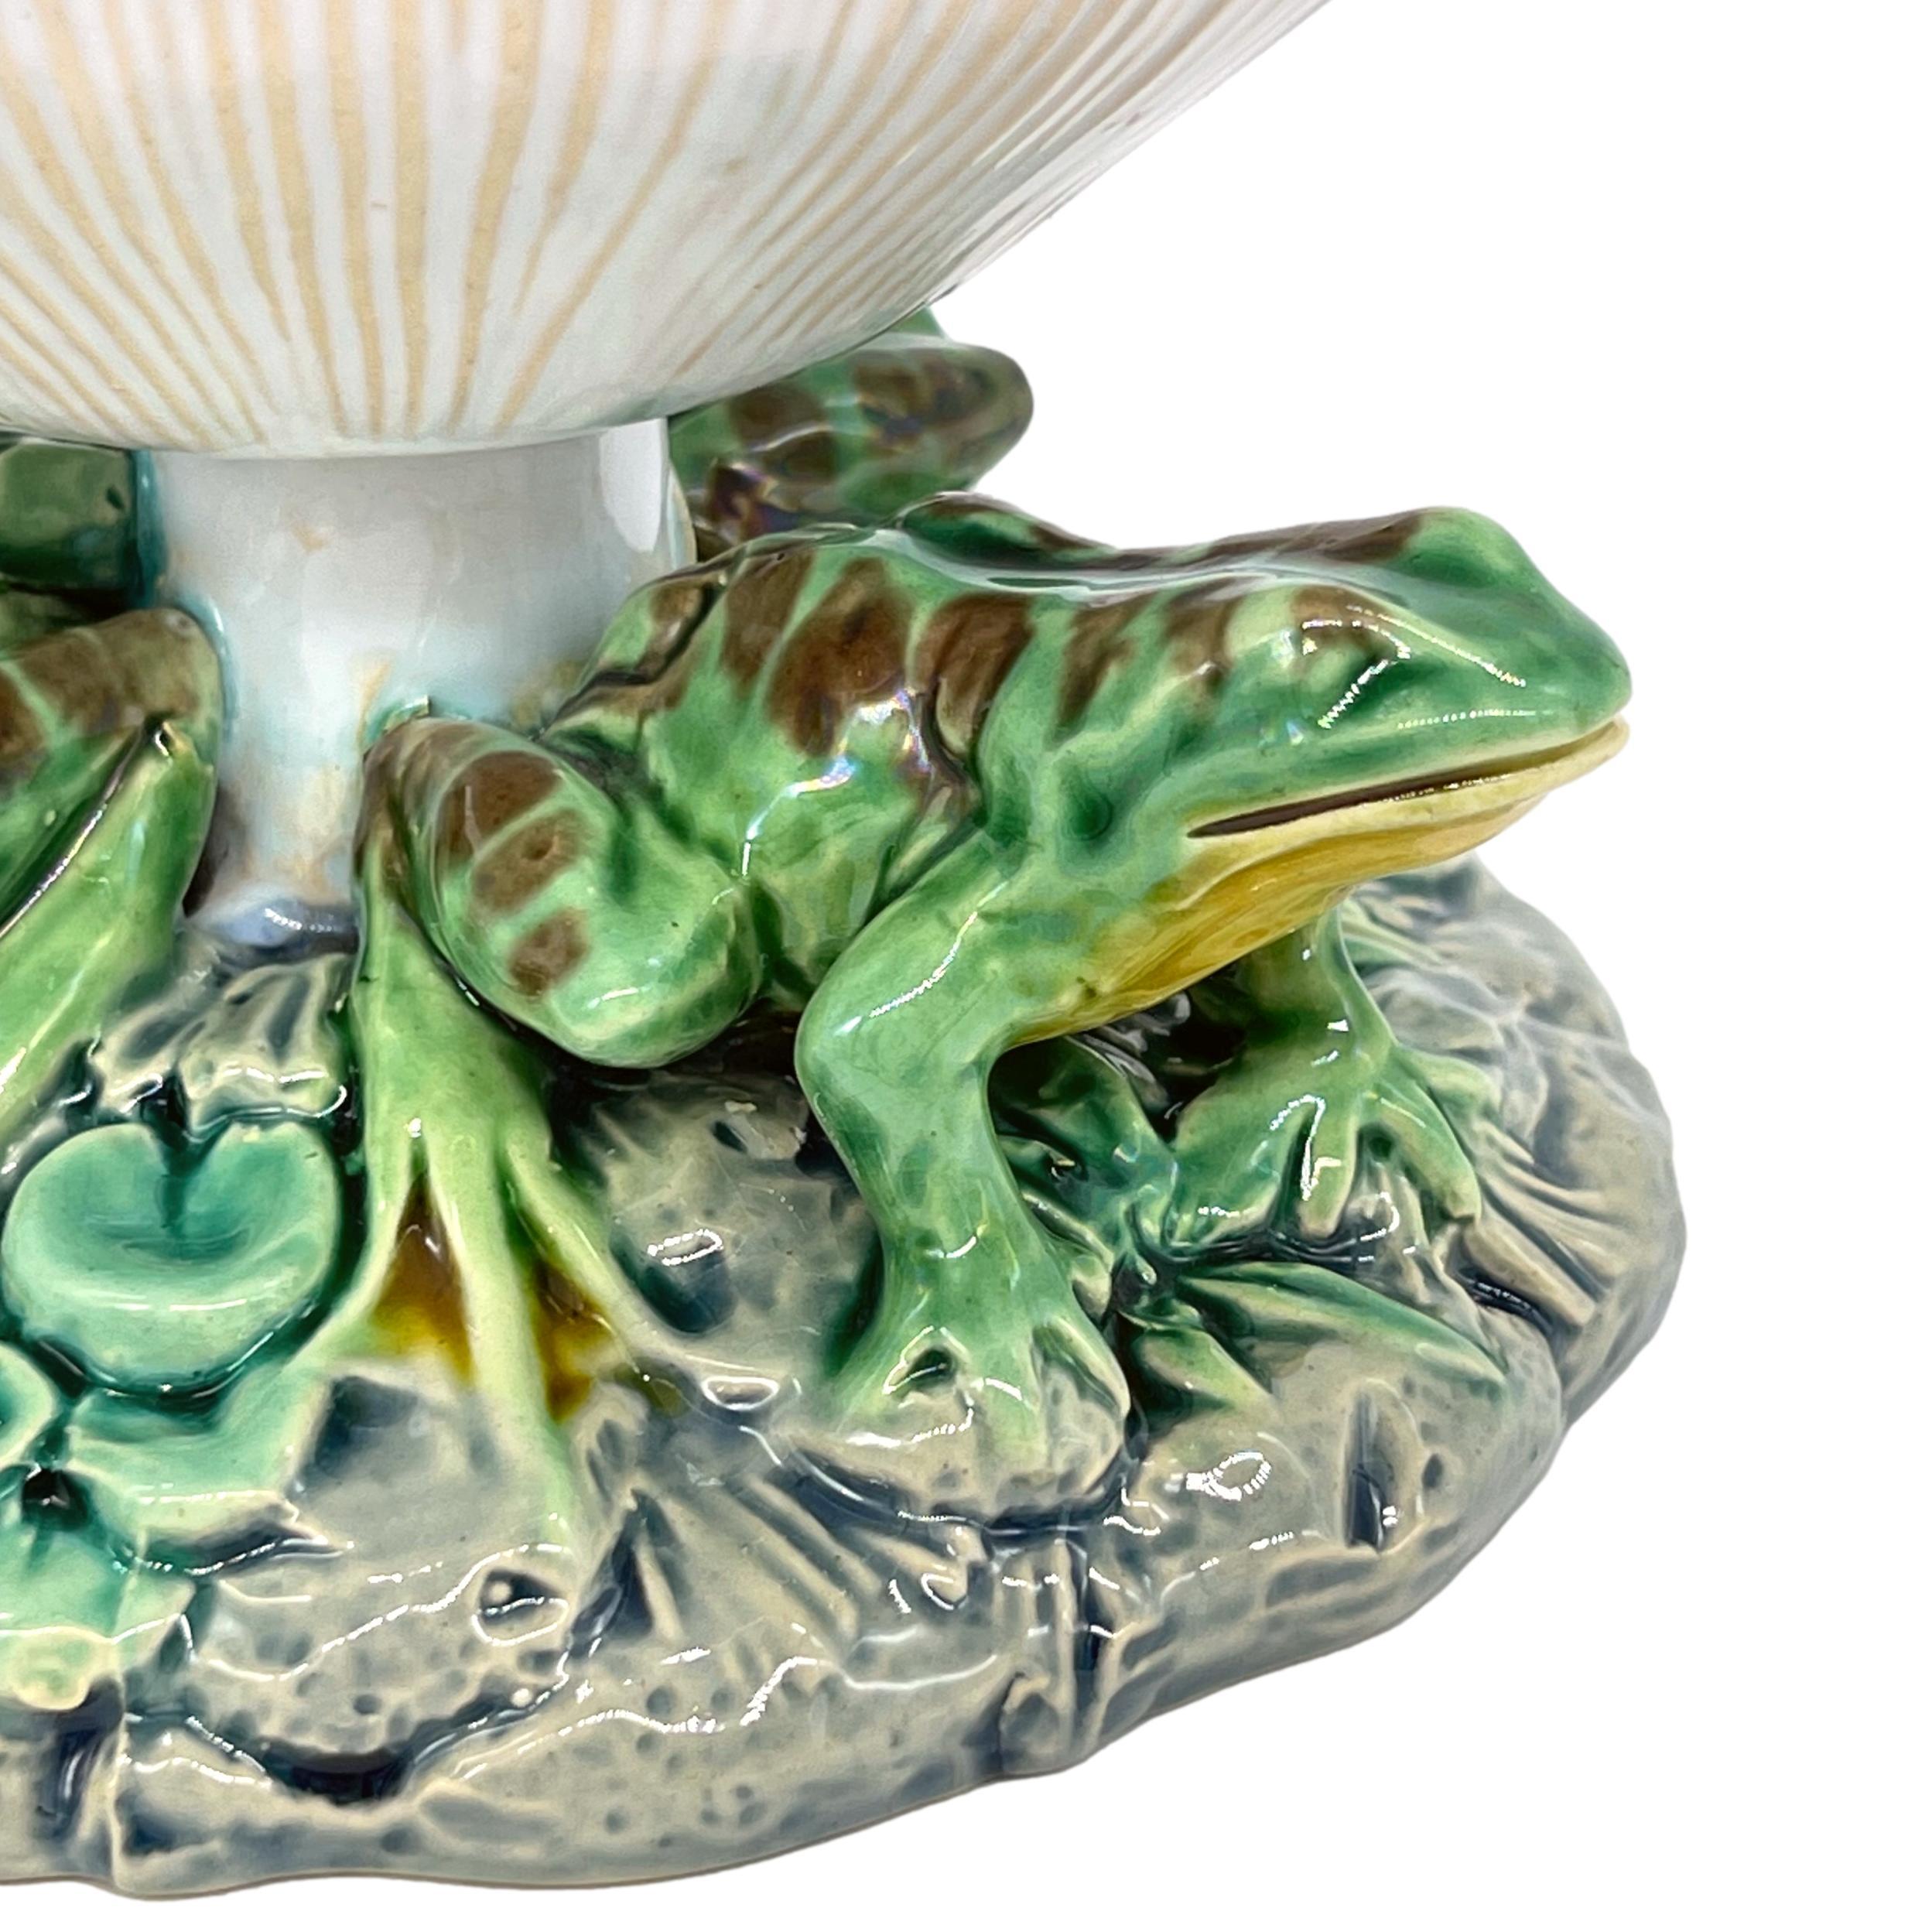 19th Century Minton Majolica Mushroom Tazza with Three-Frog Base, English, Dated 1868 For Sale